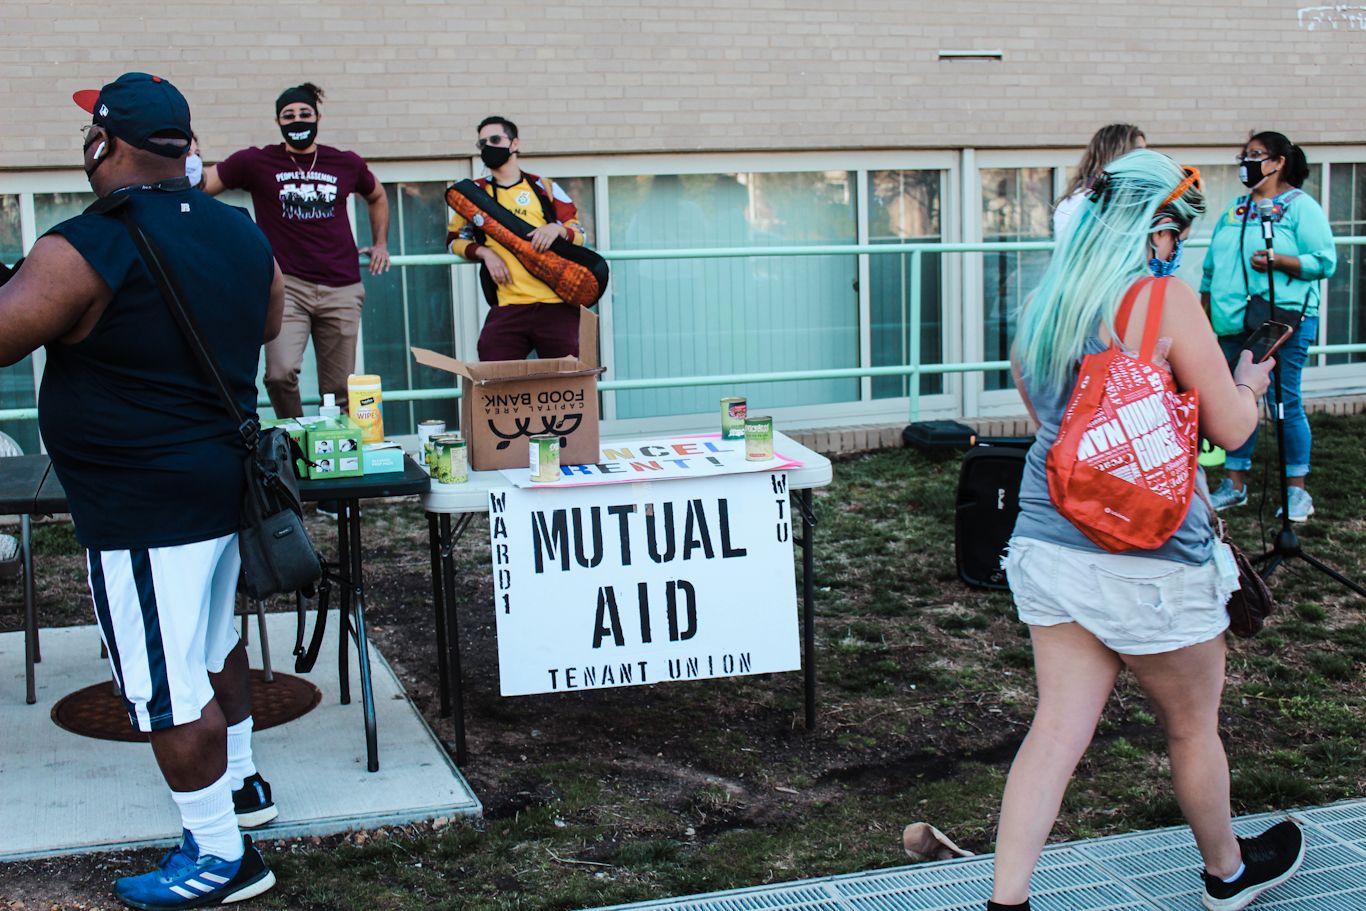 A DC Ward 1 Mutual Aid table set up at a Cancel Rent rally to support tenants. Eleanor Goldfield | ArtKillingApathy.com